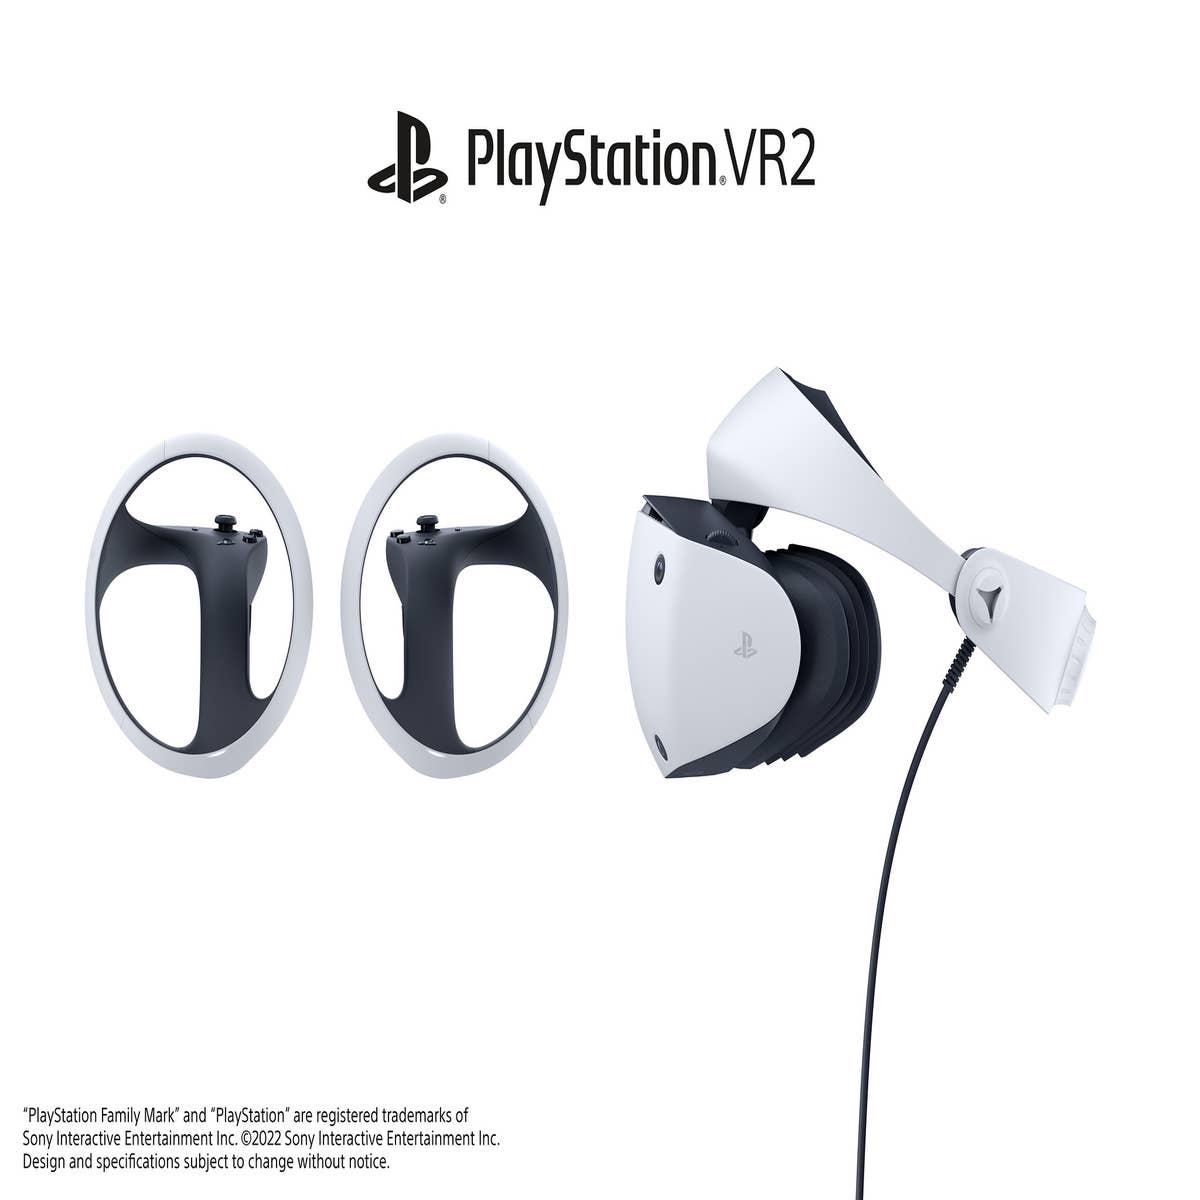 PlayStation VR2 shows off its exciting new modes and features